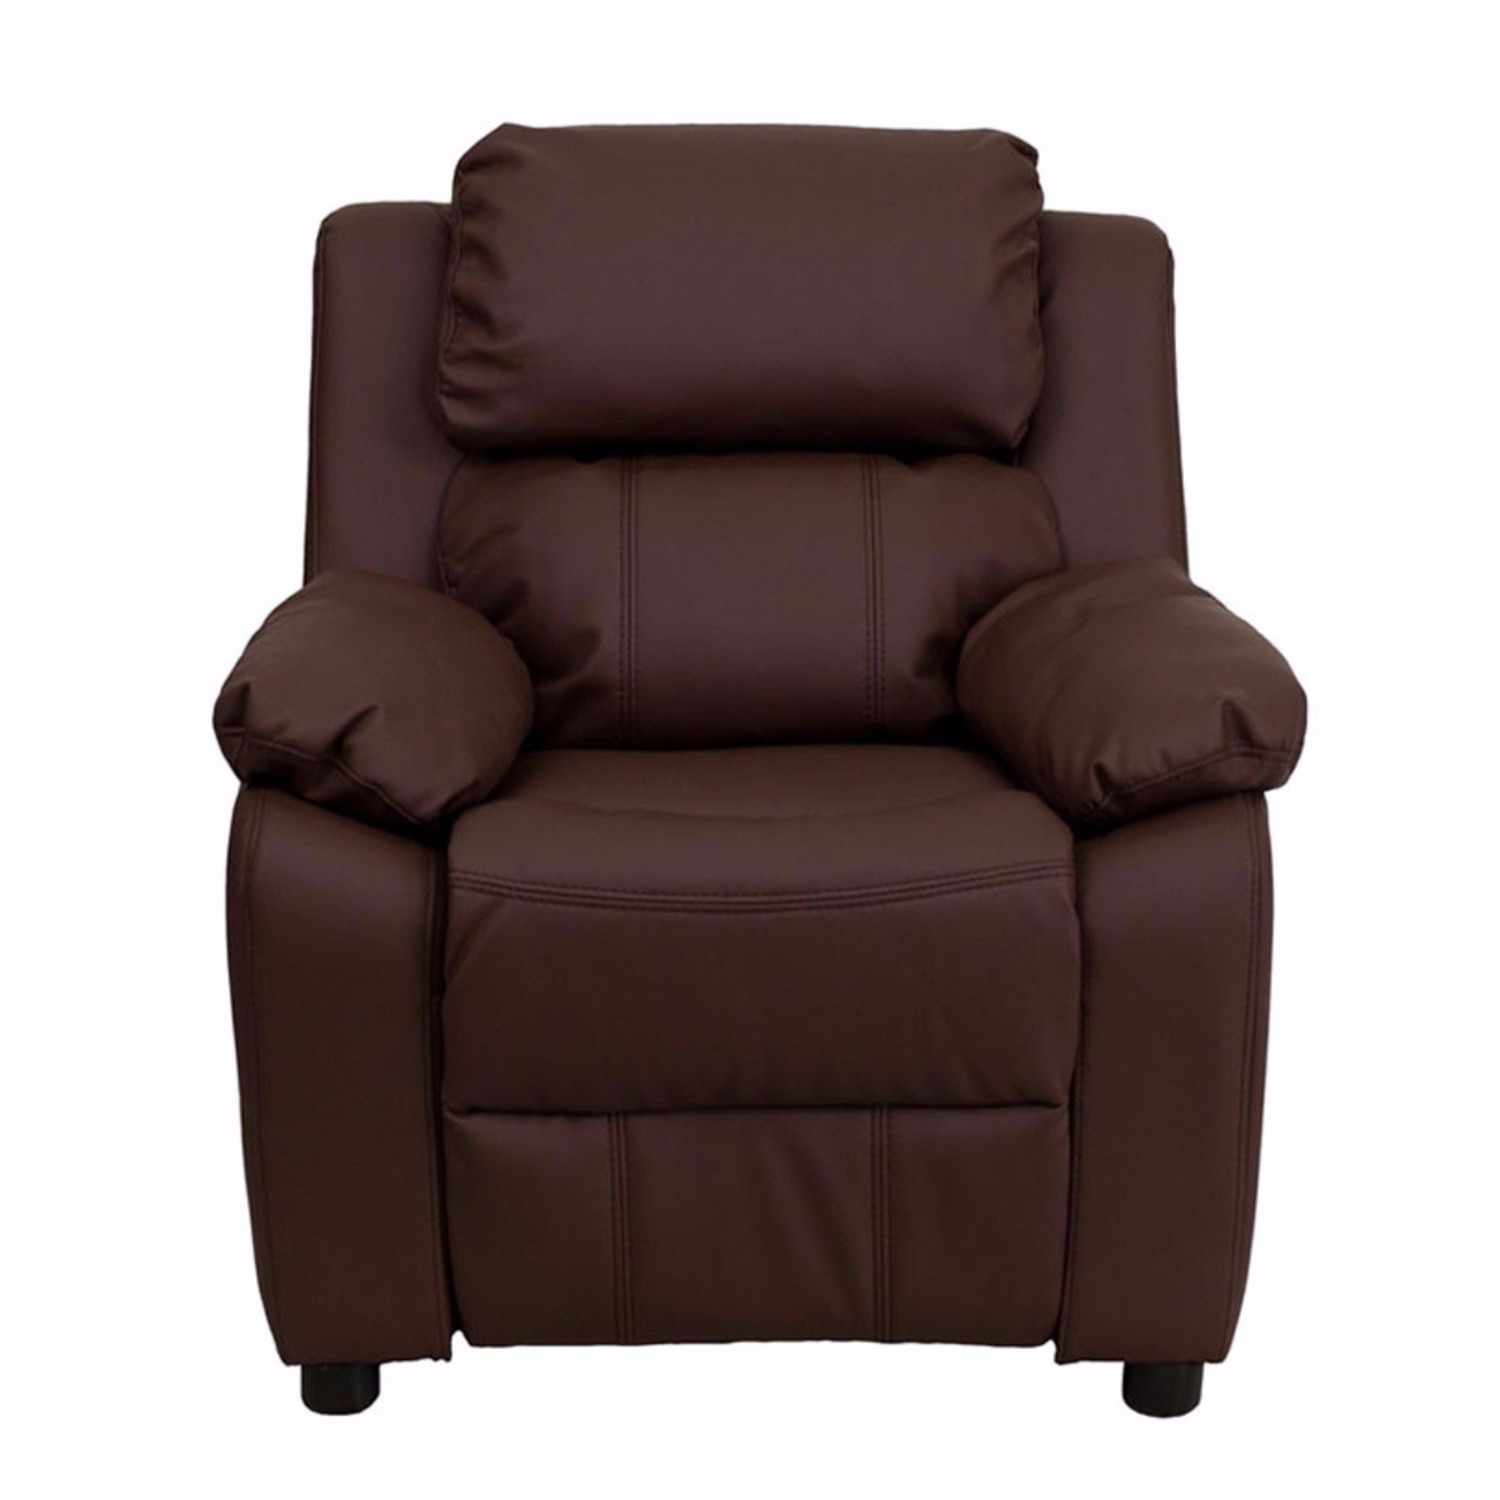 Deluxe Padded Contemporary Brown LeatherSoft Kids Recliner with Storage Arms